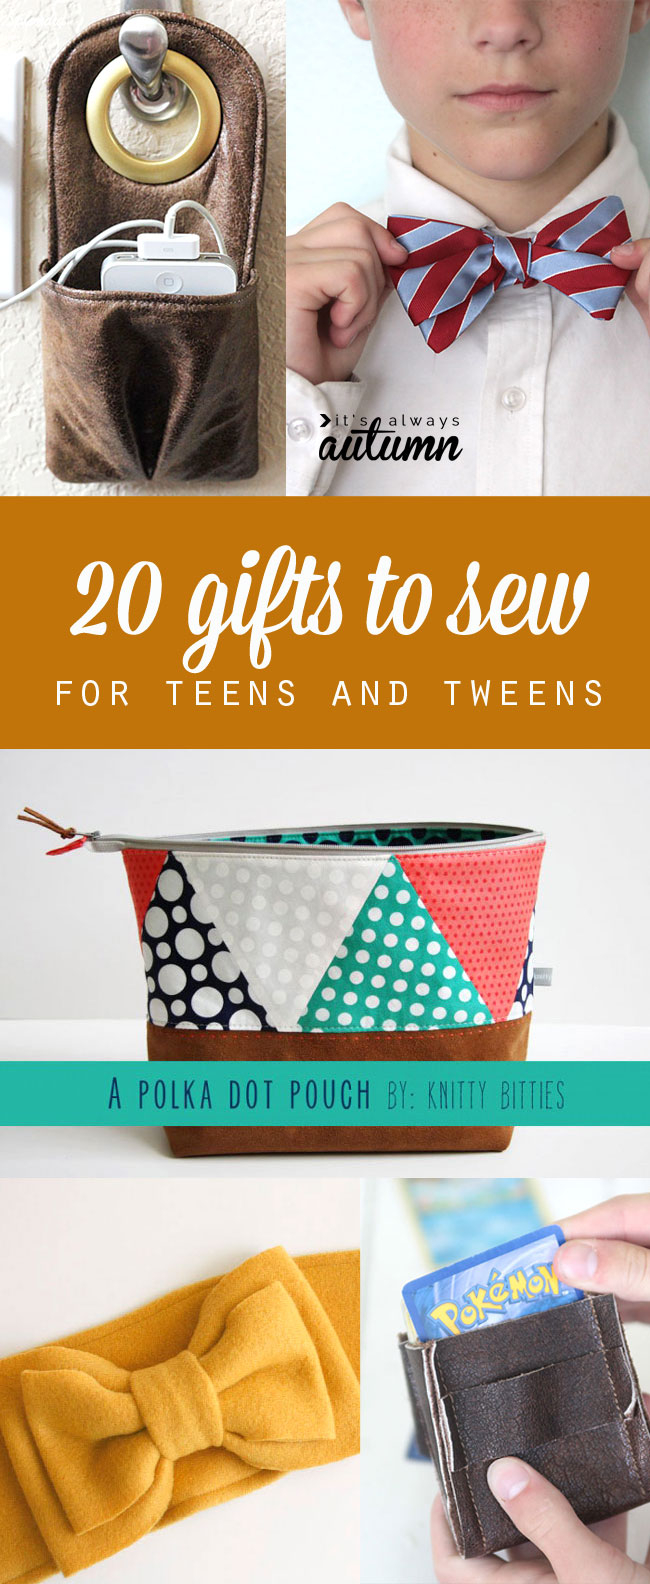 Sewing Project Ideas 20 Gifts To Sew For Teens That Theyll Actually Like A Giveaway